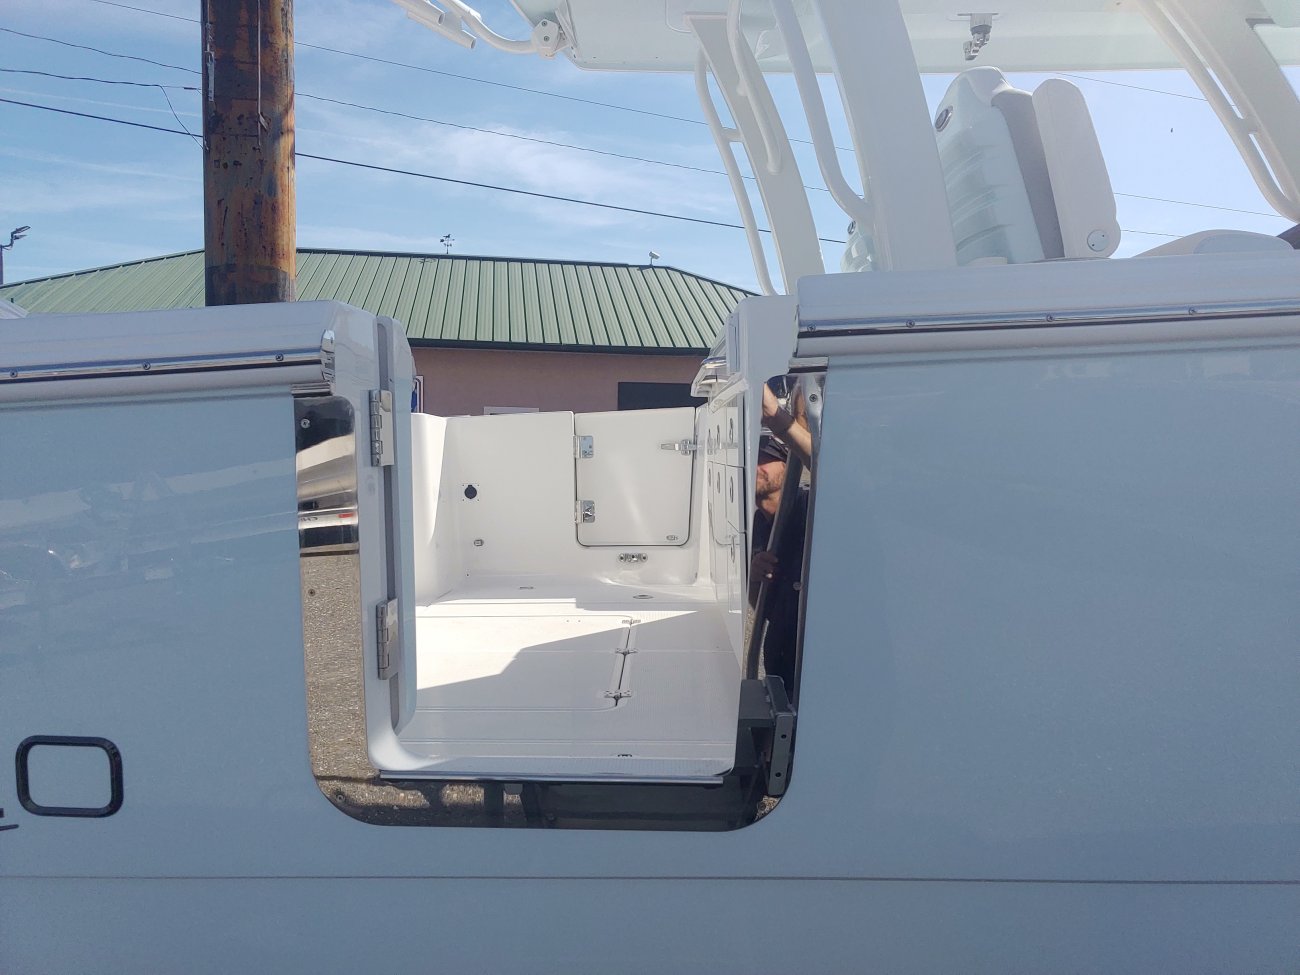 The definition of an outboard motor is a detachable engine mounted on outboard brackets on the stern of your boat.  This configuration will have twin engines.